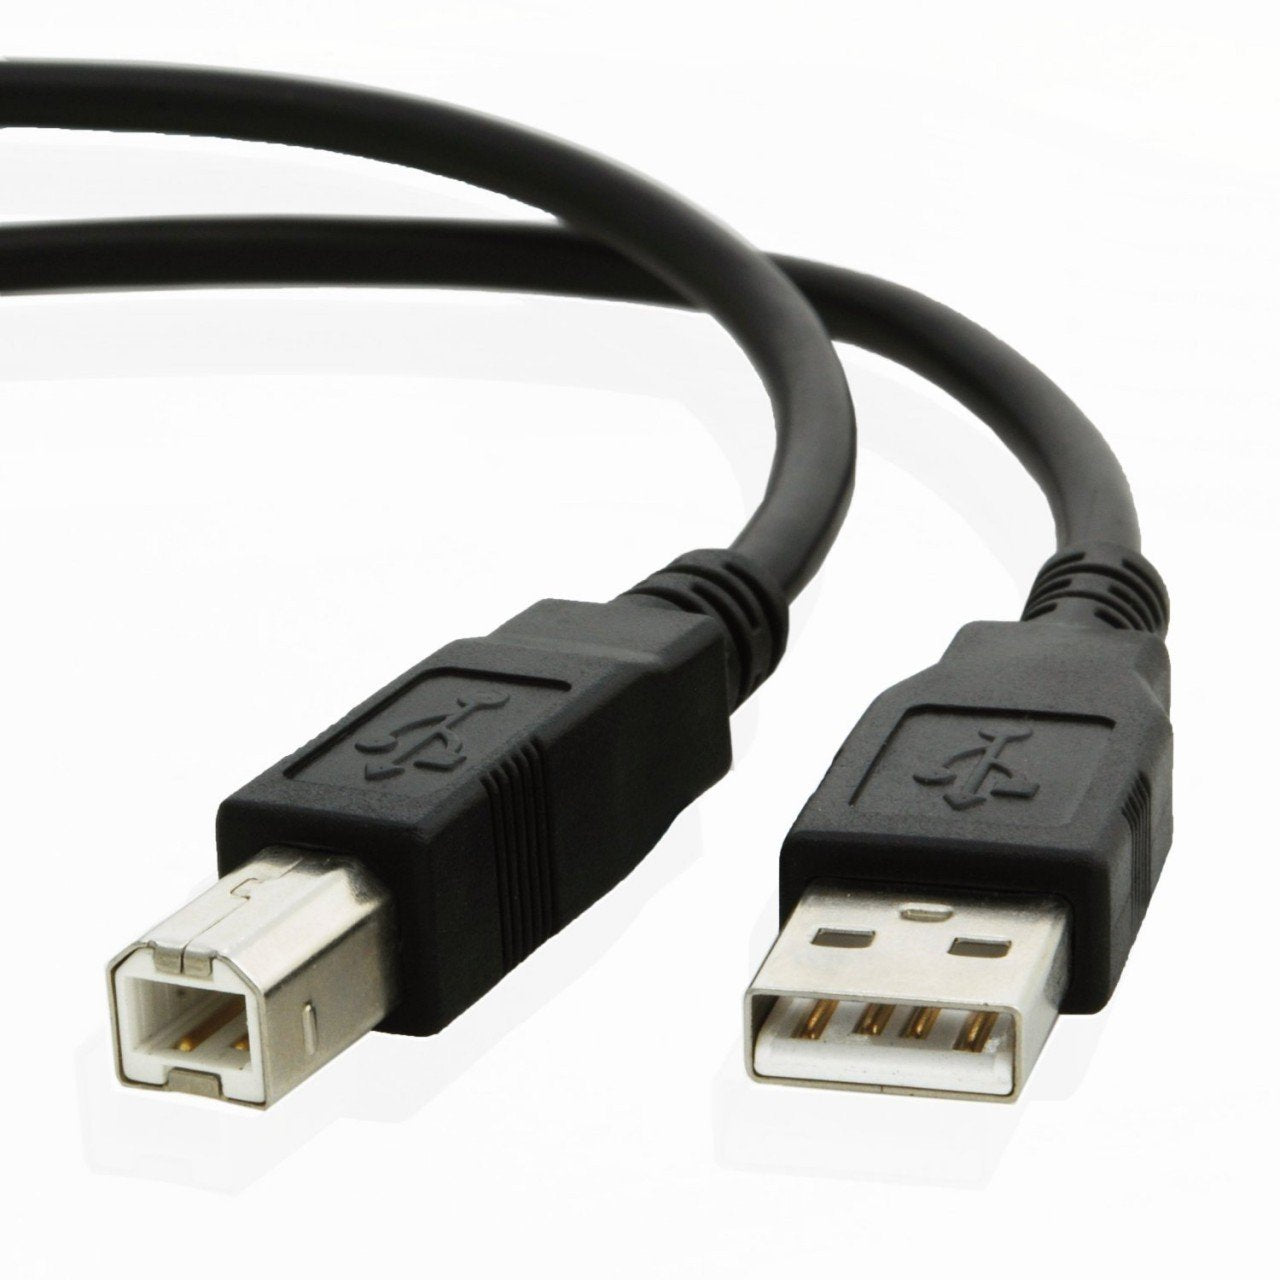 USB cable for Epson IMPACT FX-890